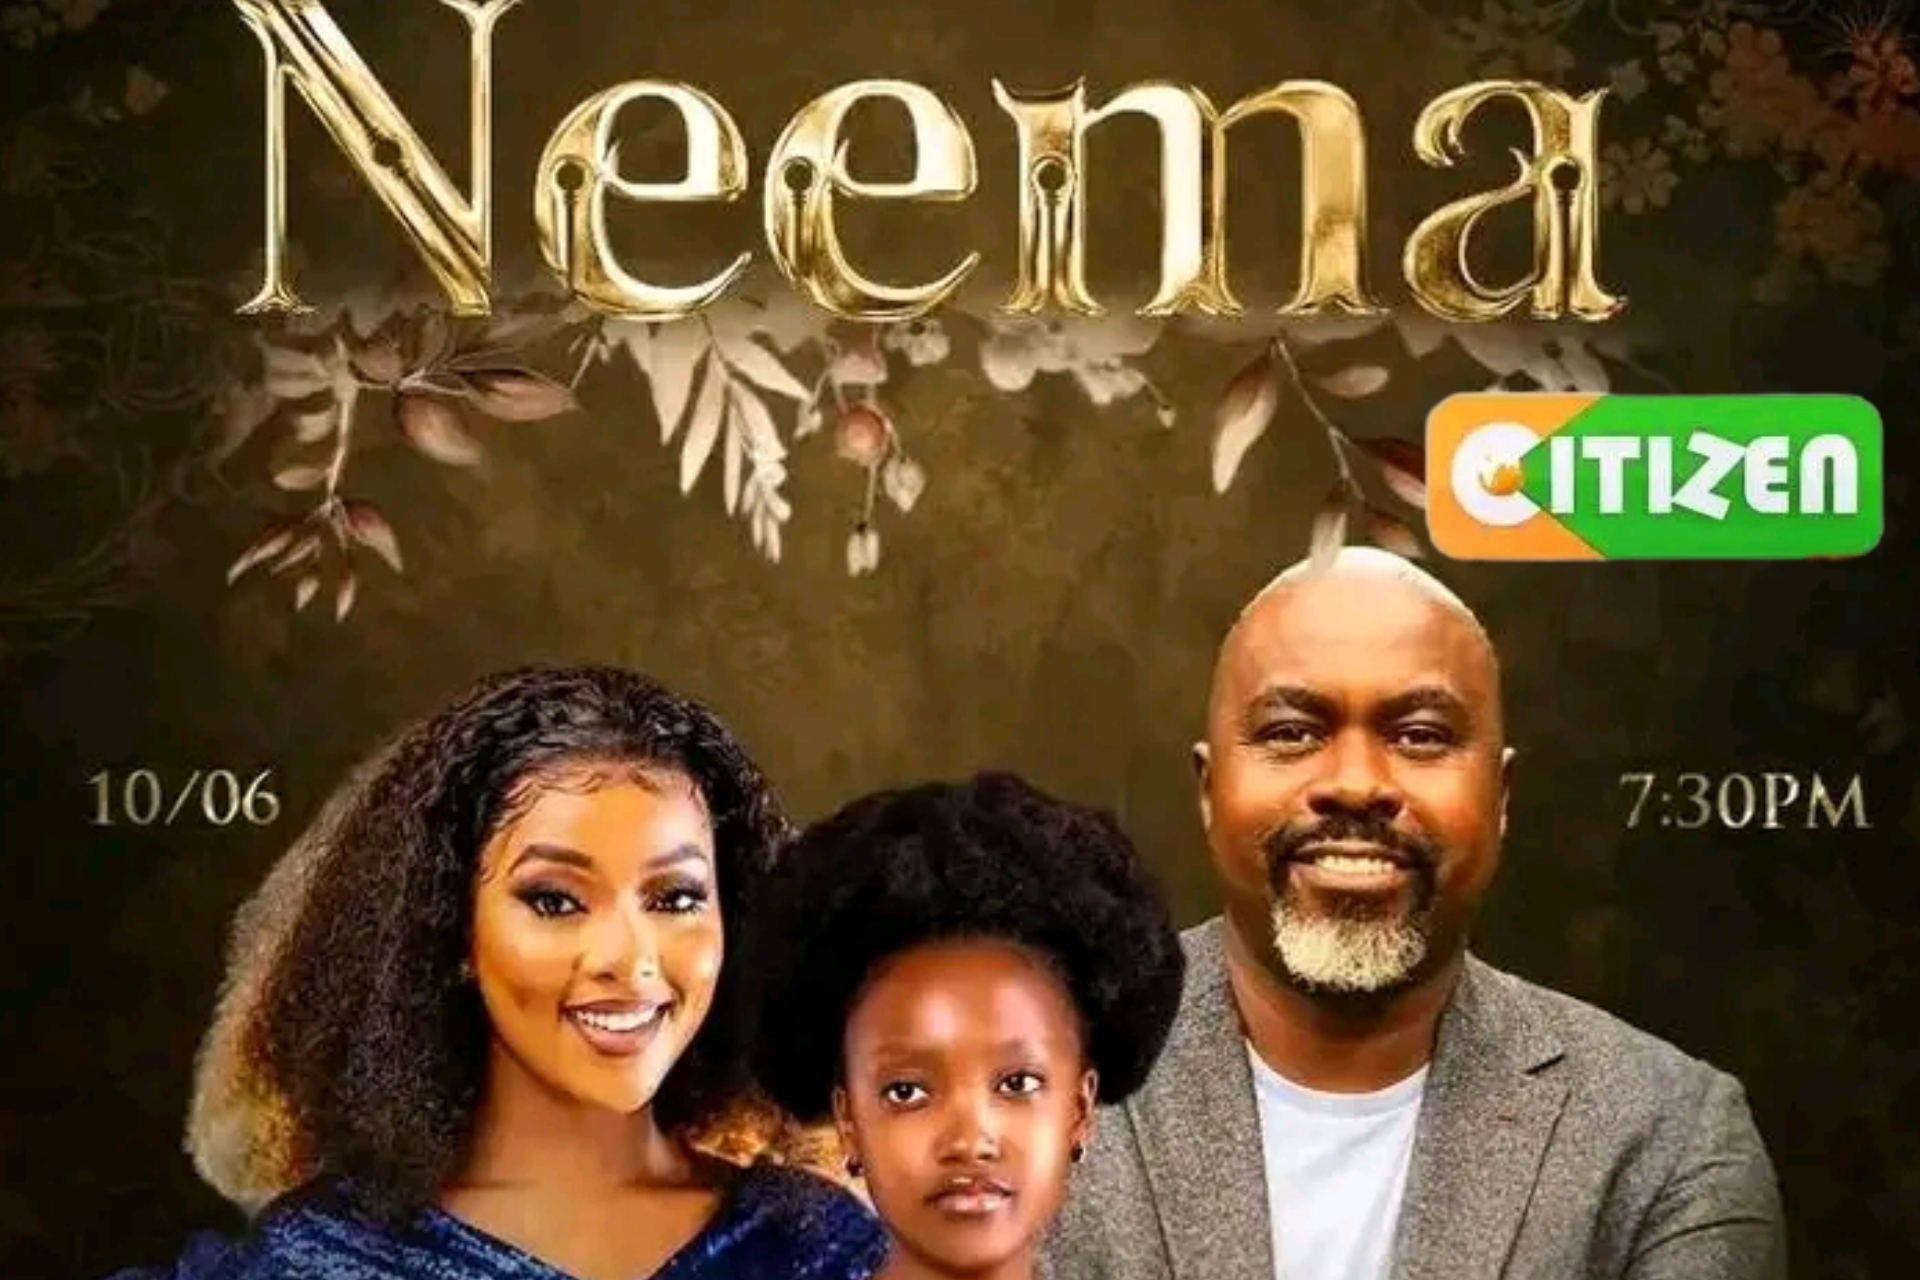 NEEMA Citizen Tv: Details of New Series Set to Replace BECKY